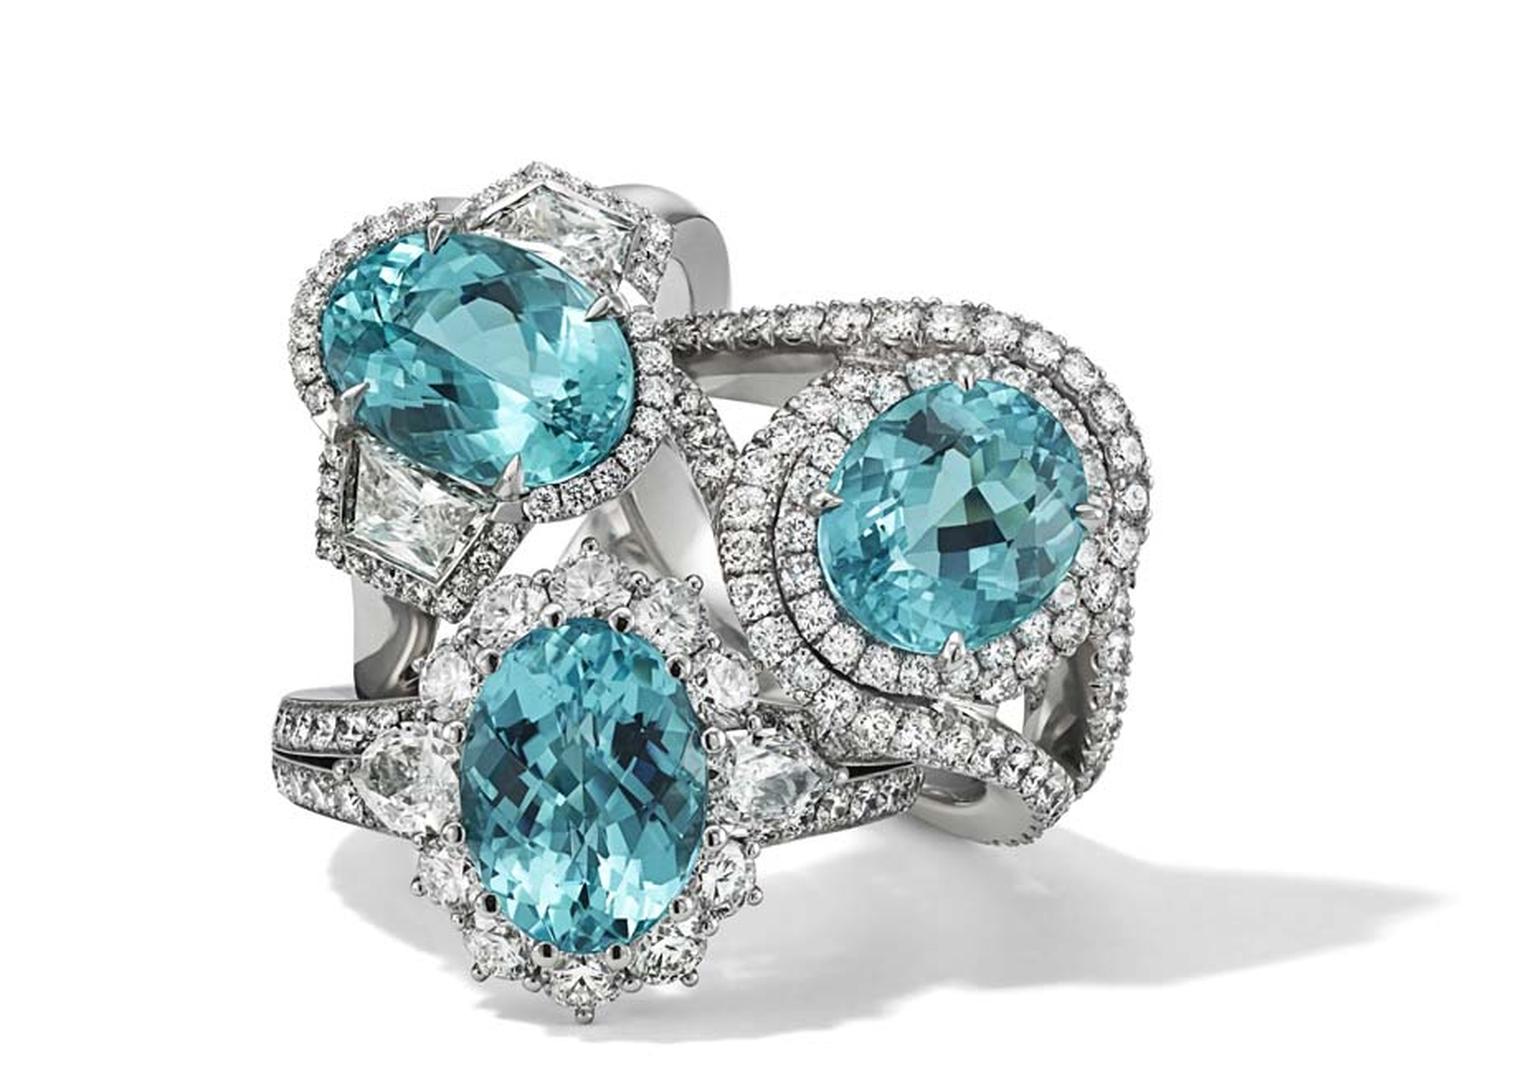 Hans D. Krieger is one of the few jewellers still producing new designs set with impressive Brazilian Paraiba tourmalines.